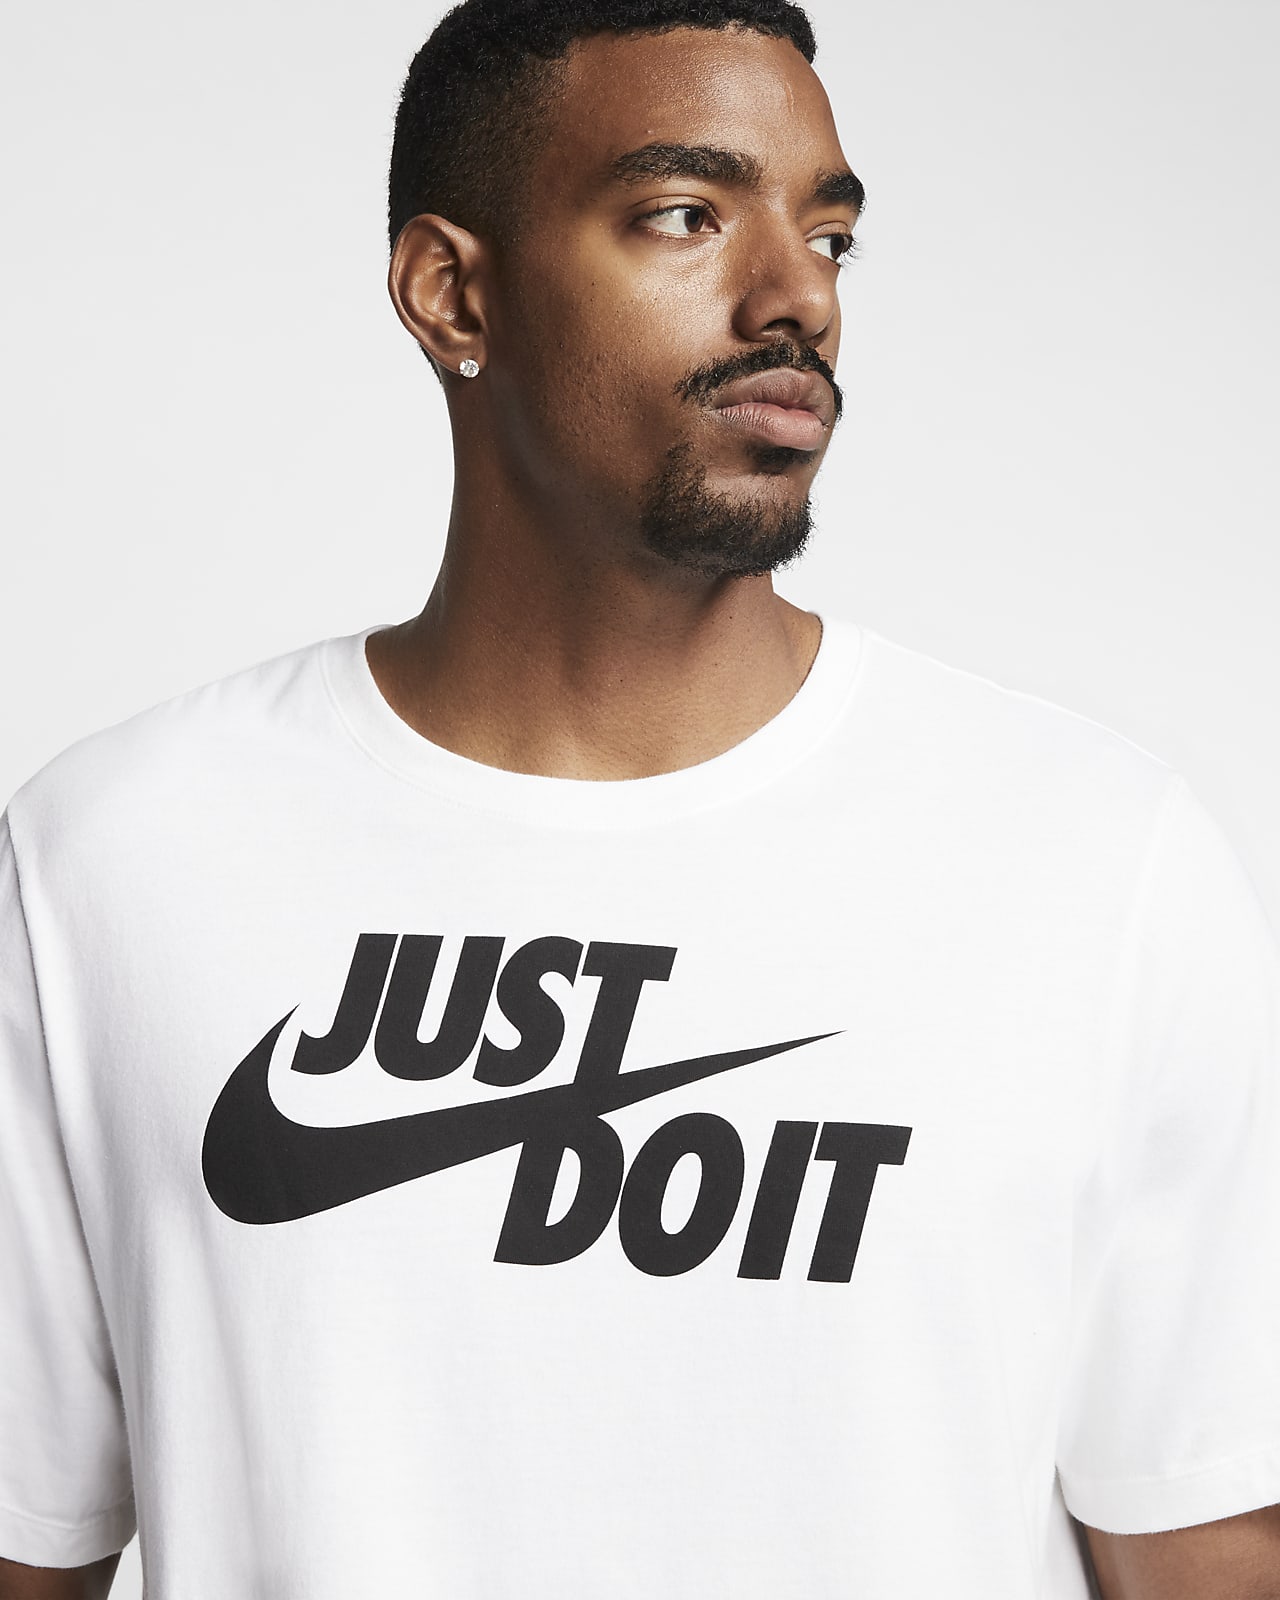 nike solid t shirt